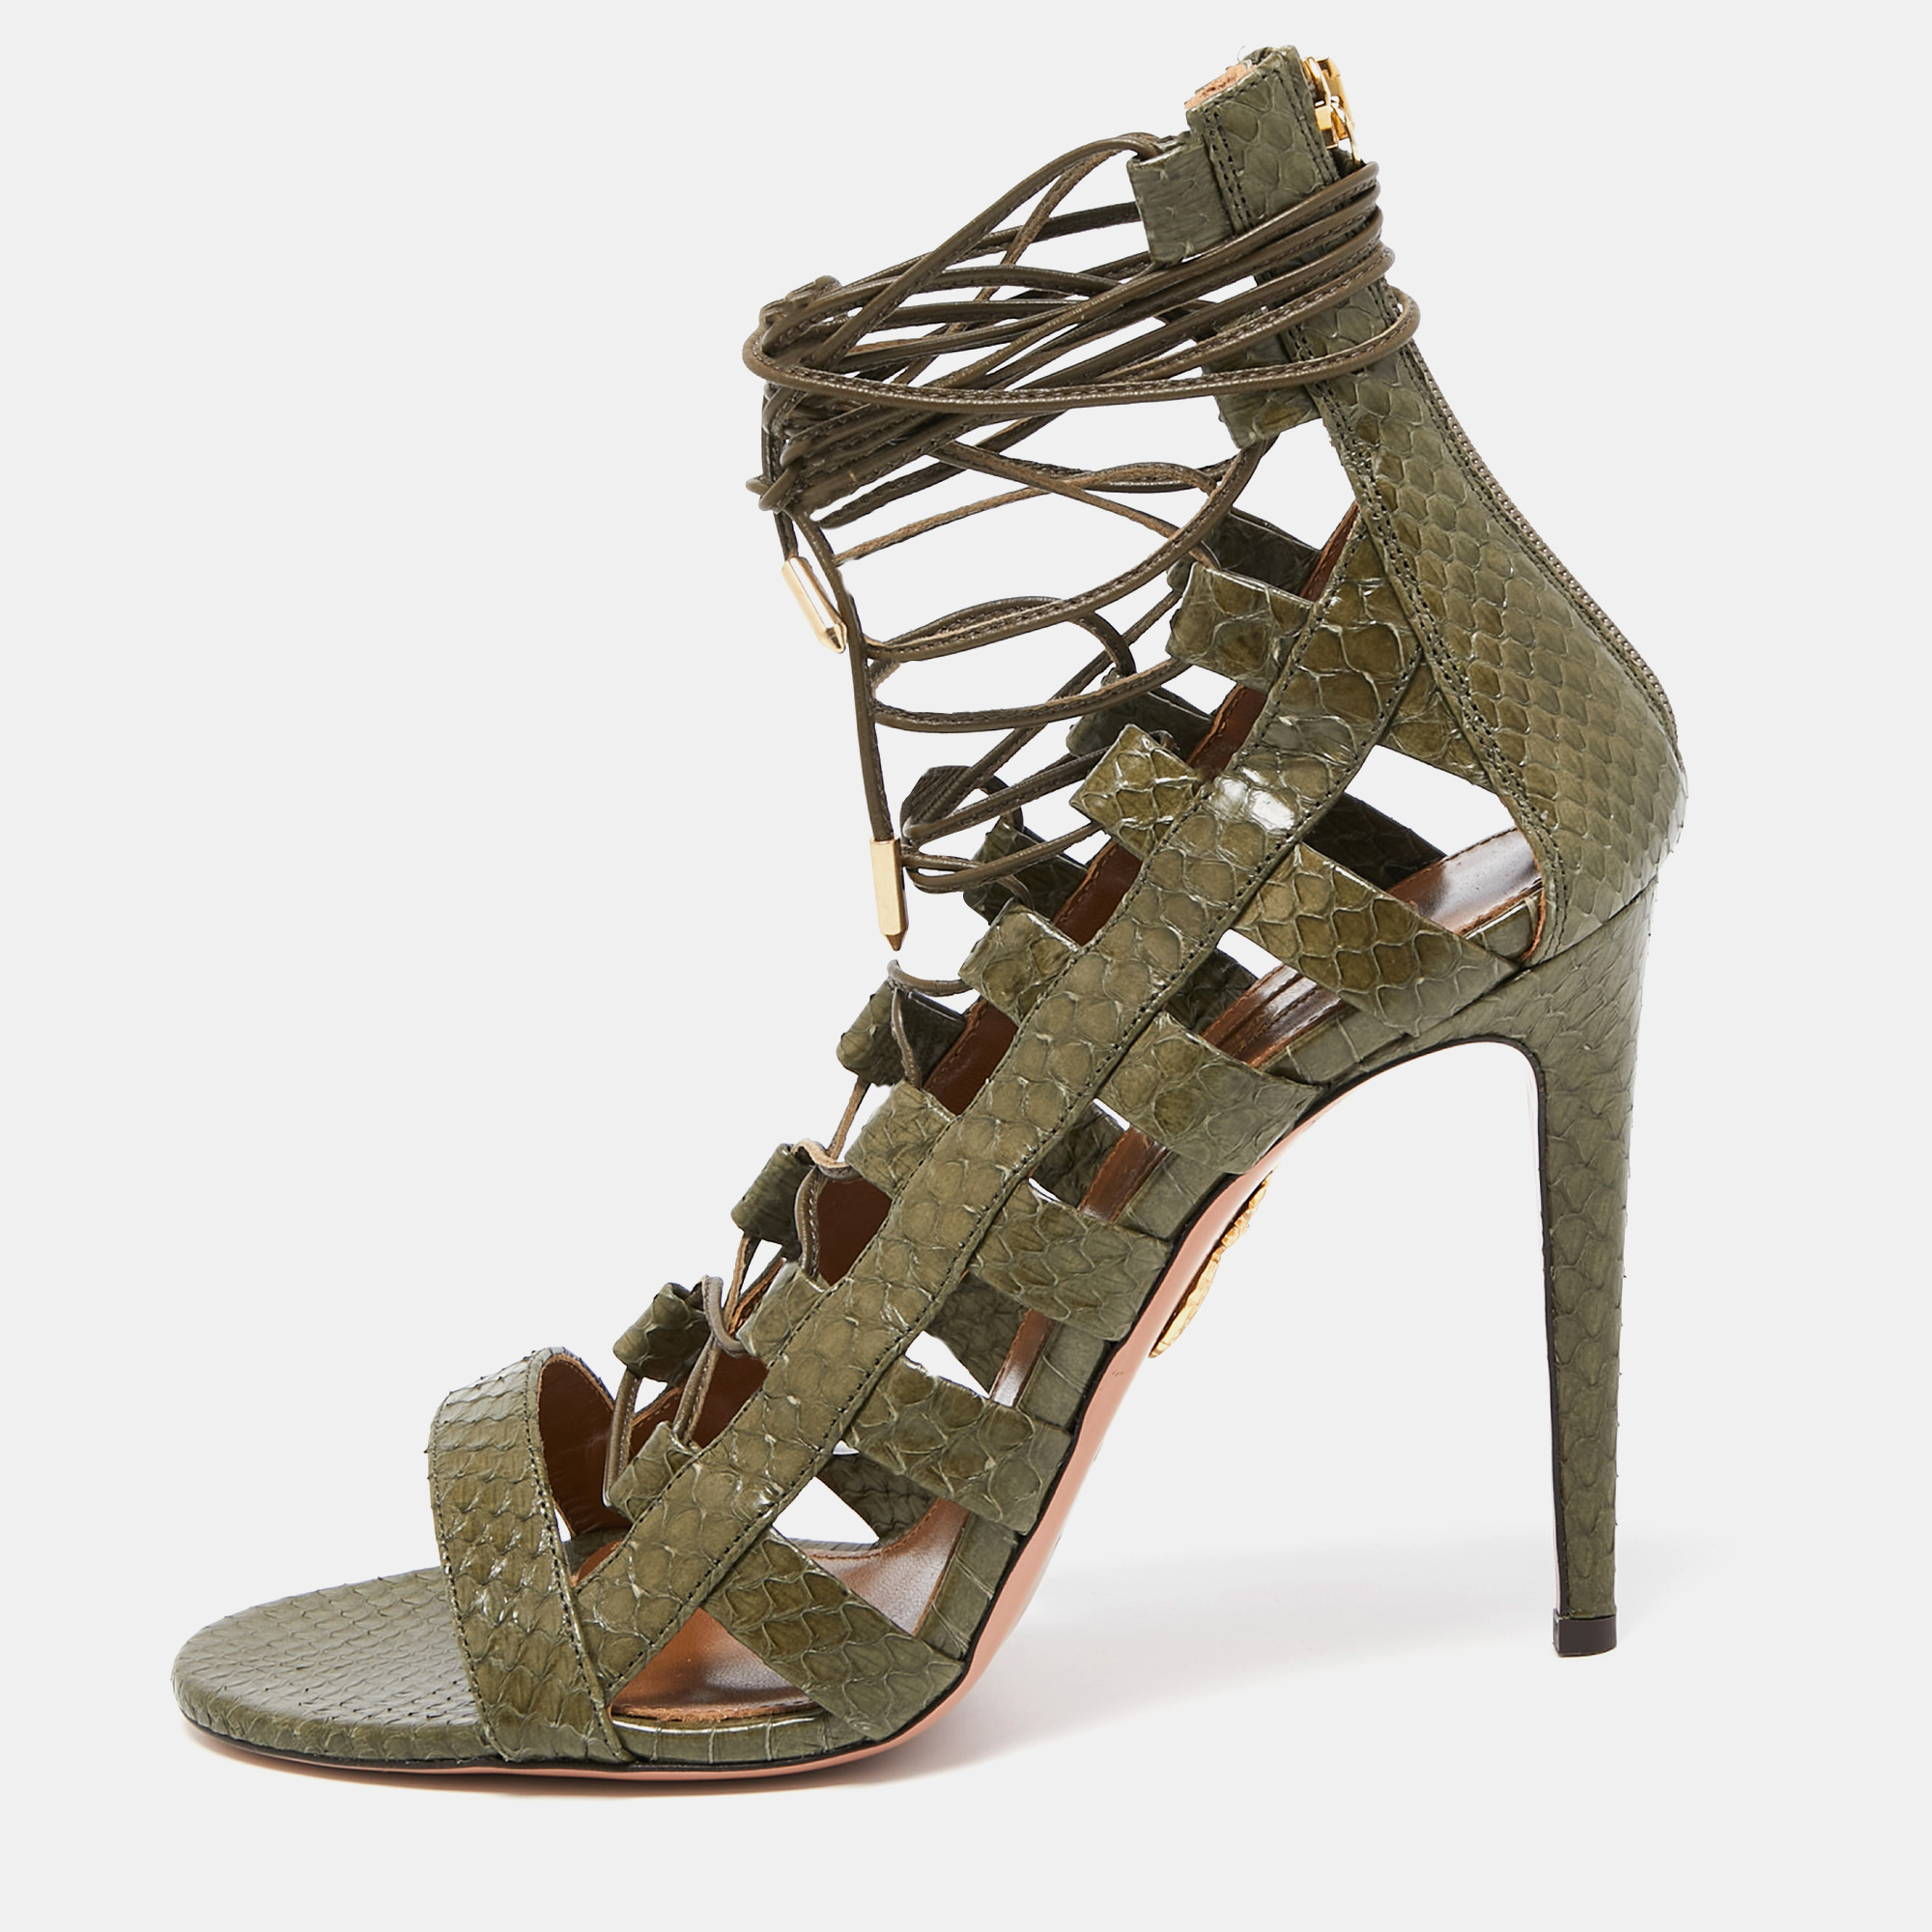 Pre-owned Aquazzura Green Python Amazon Lace Up Open Toe Sandals Size 41